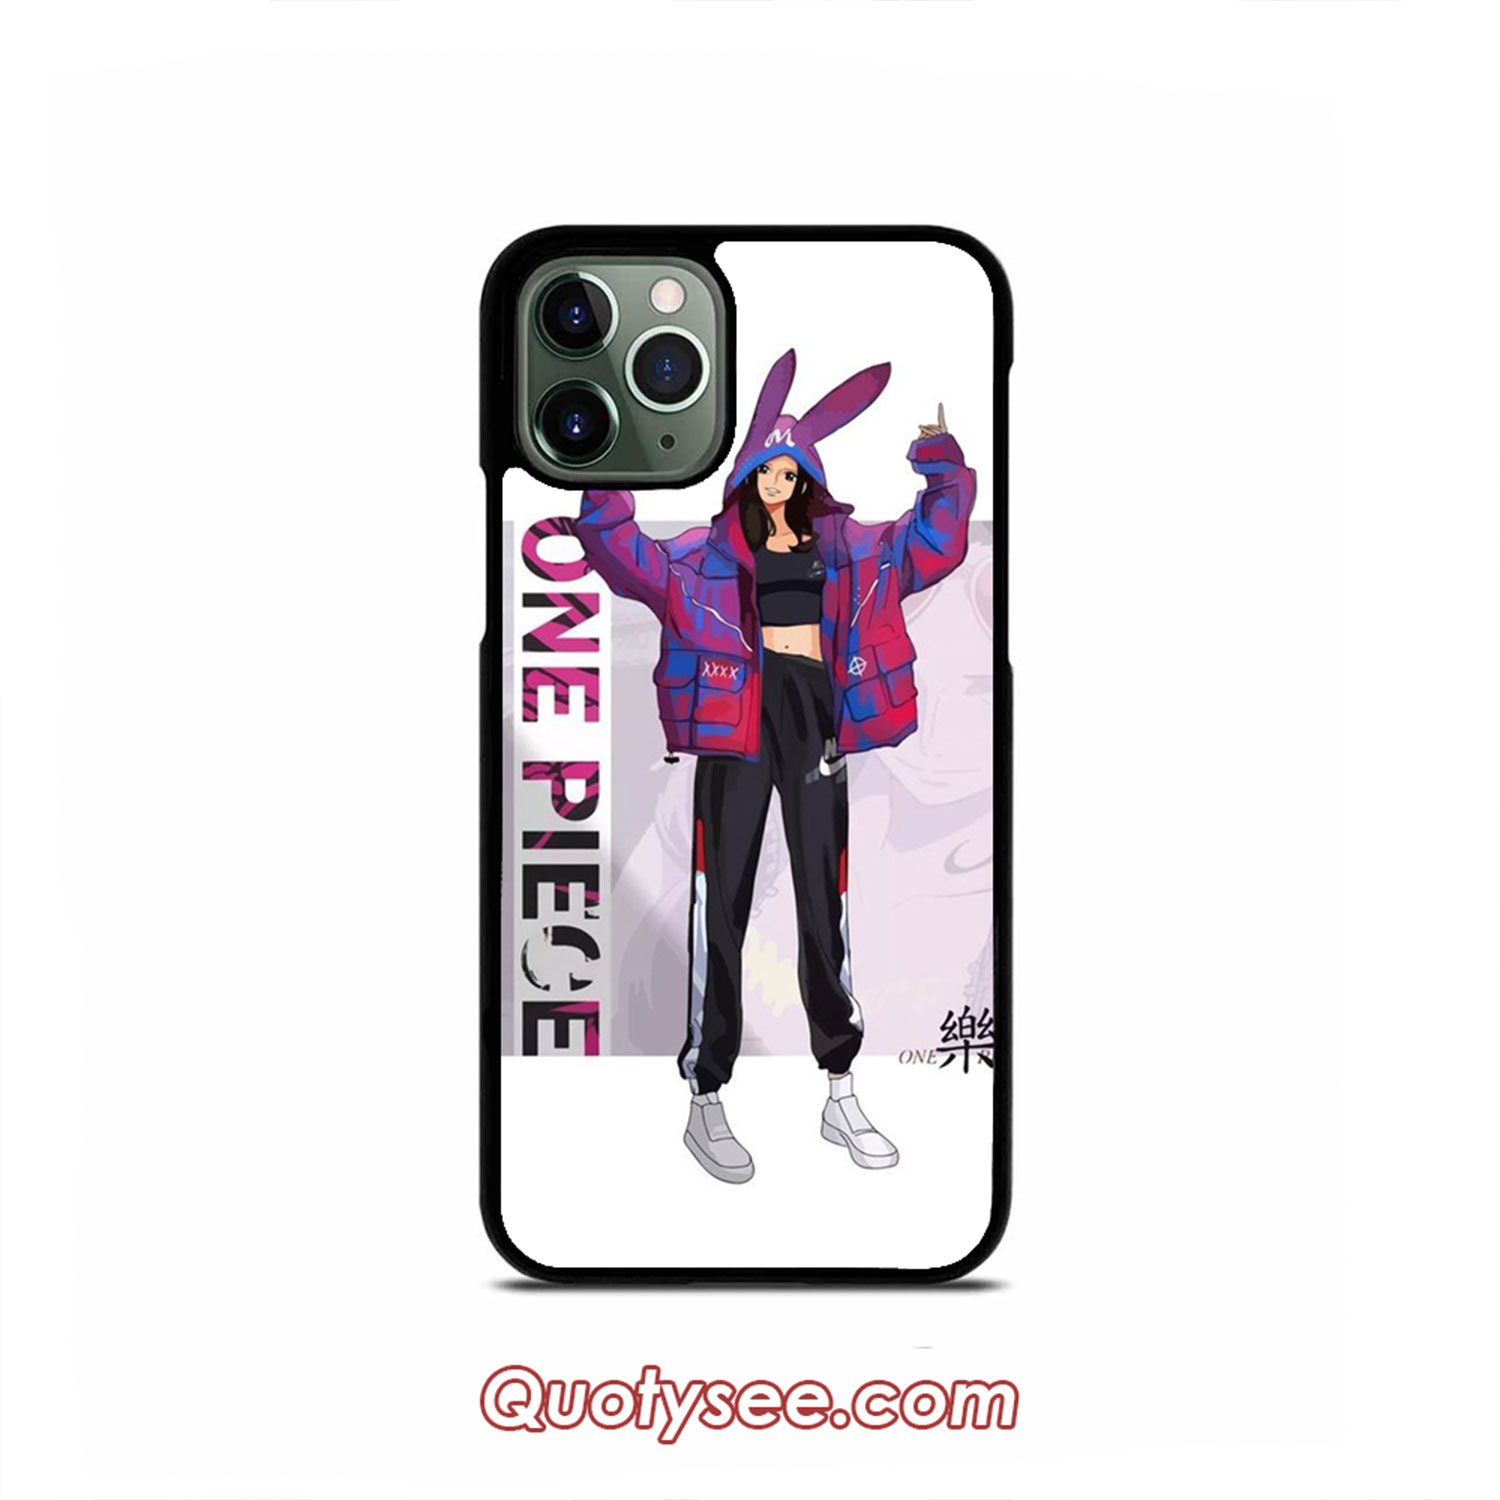 Nico Robin One Piece Iphone Case 11 11 Pro 11 Pro Max Xs Max Xr X 8 8 Plus 7 7 Plus 6 6s Quotysee Com